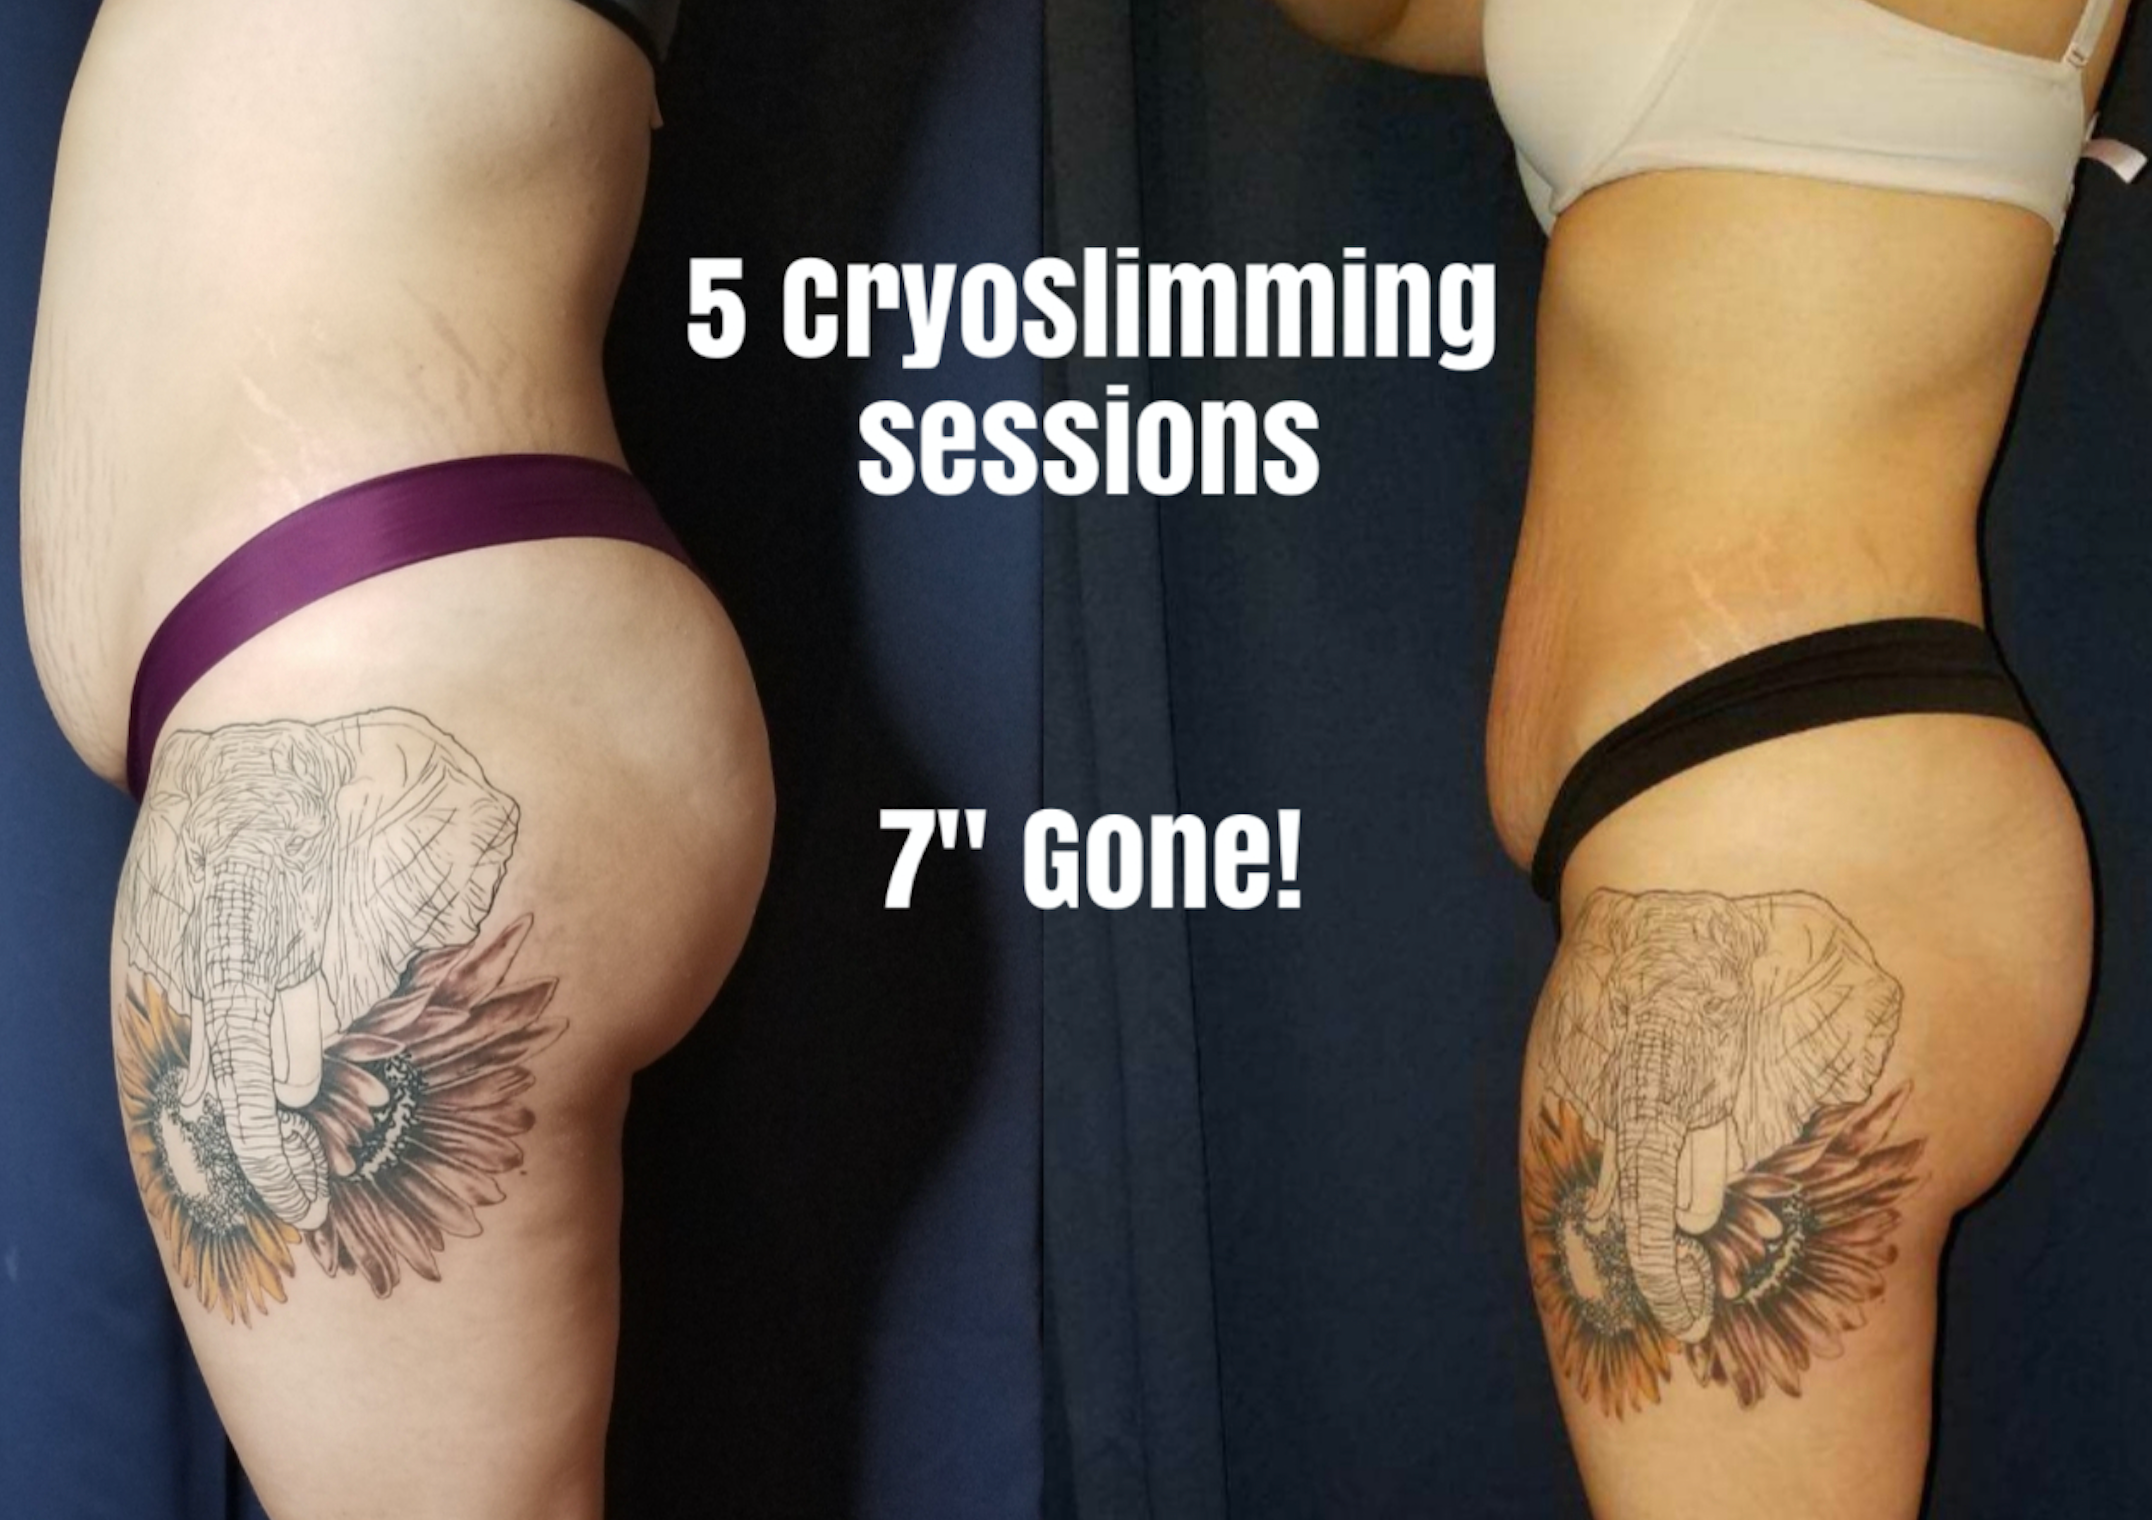 Transform in 6 with Cool Sculpting - Raleigh, Burlington, NC